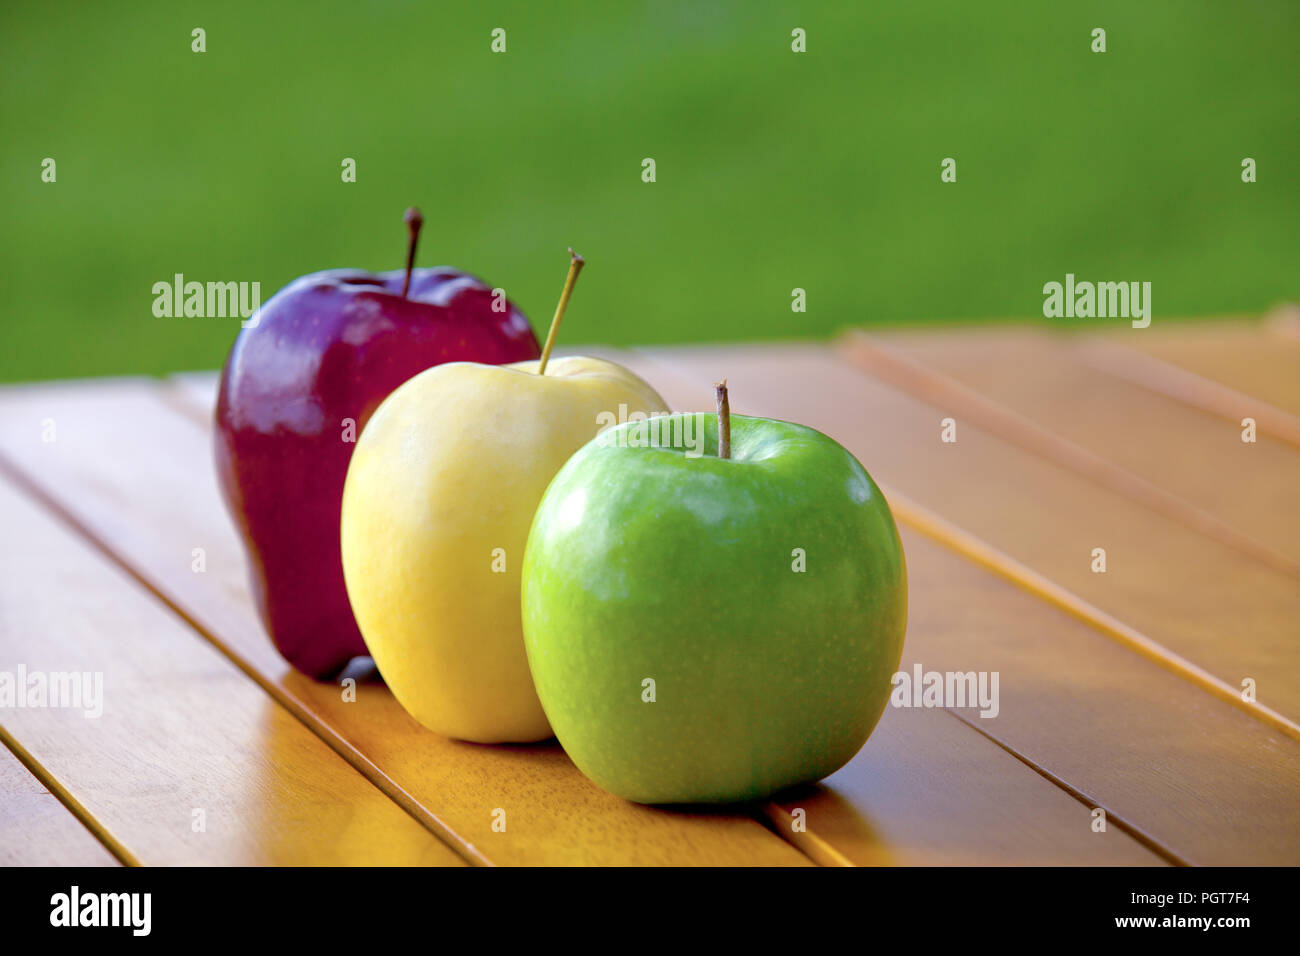 Three apples on a table red and golden delicious and granny smith Stock Photo